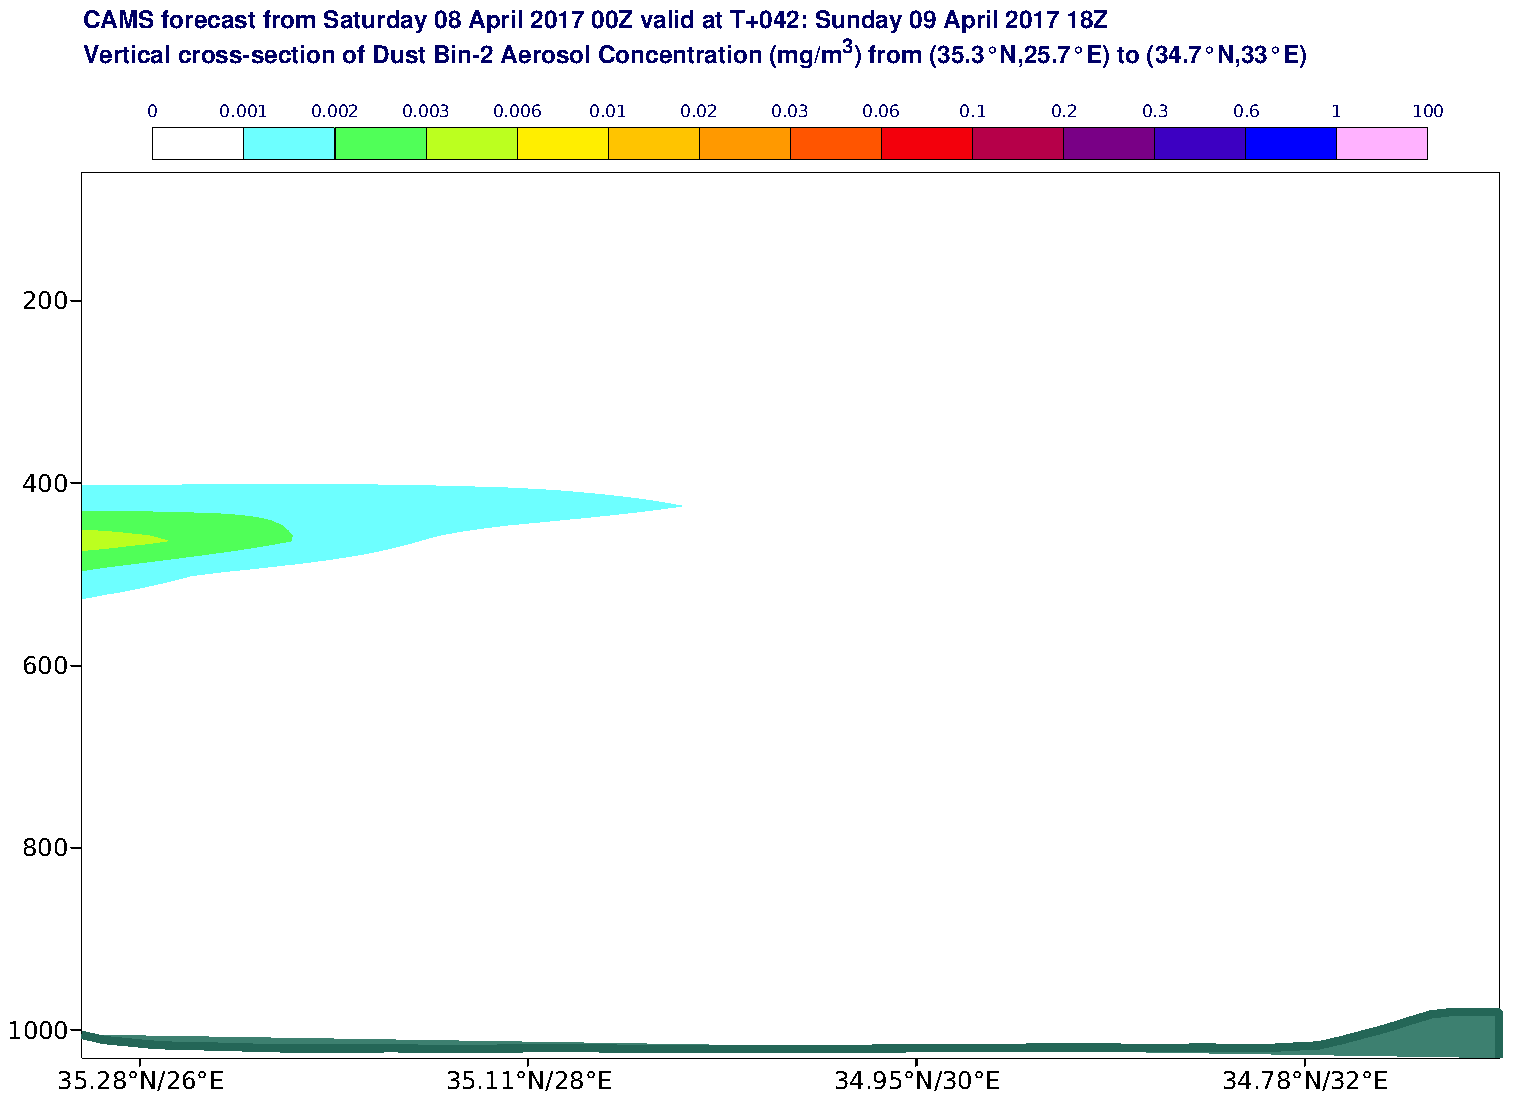 Vertical cross-section of Dust Bin-2 Aerosol Concentration (mg/m3) valid at T42 - 2017-04-09 18:00